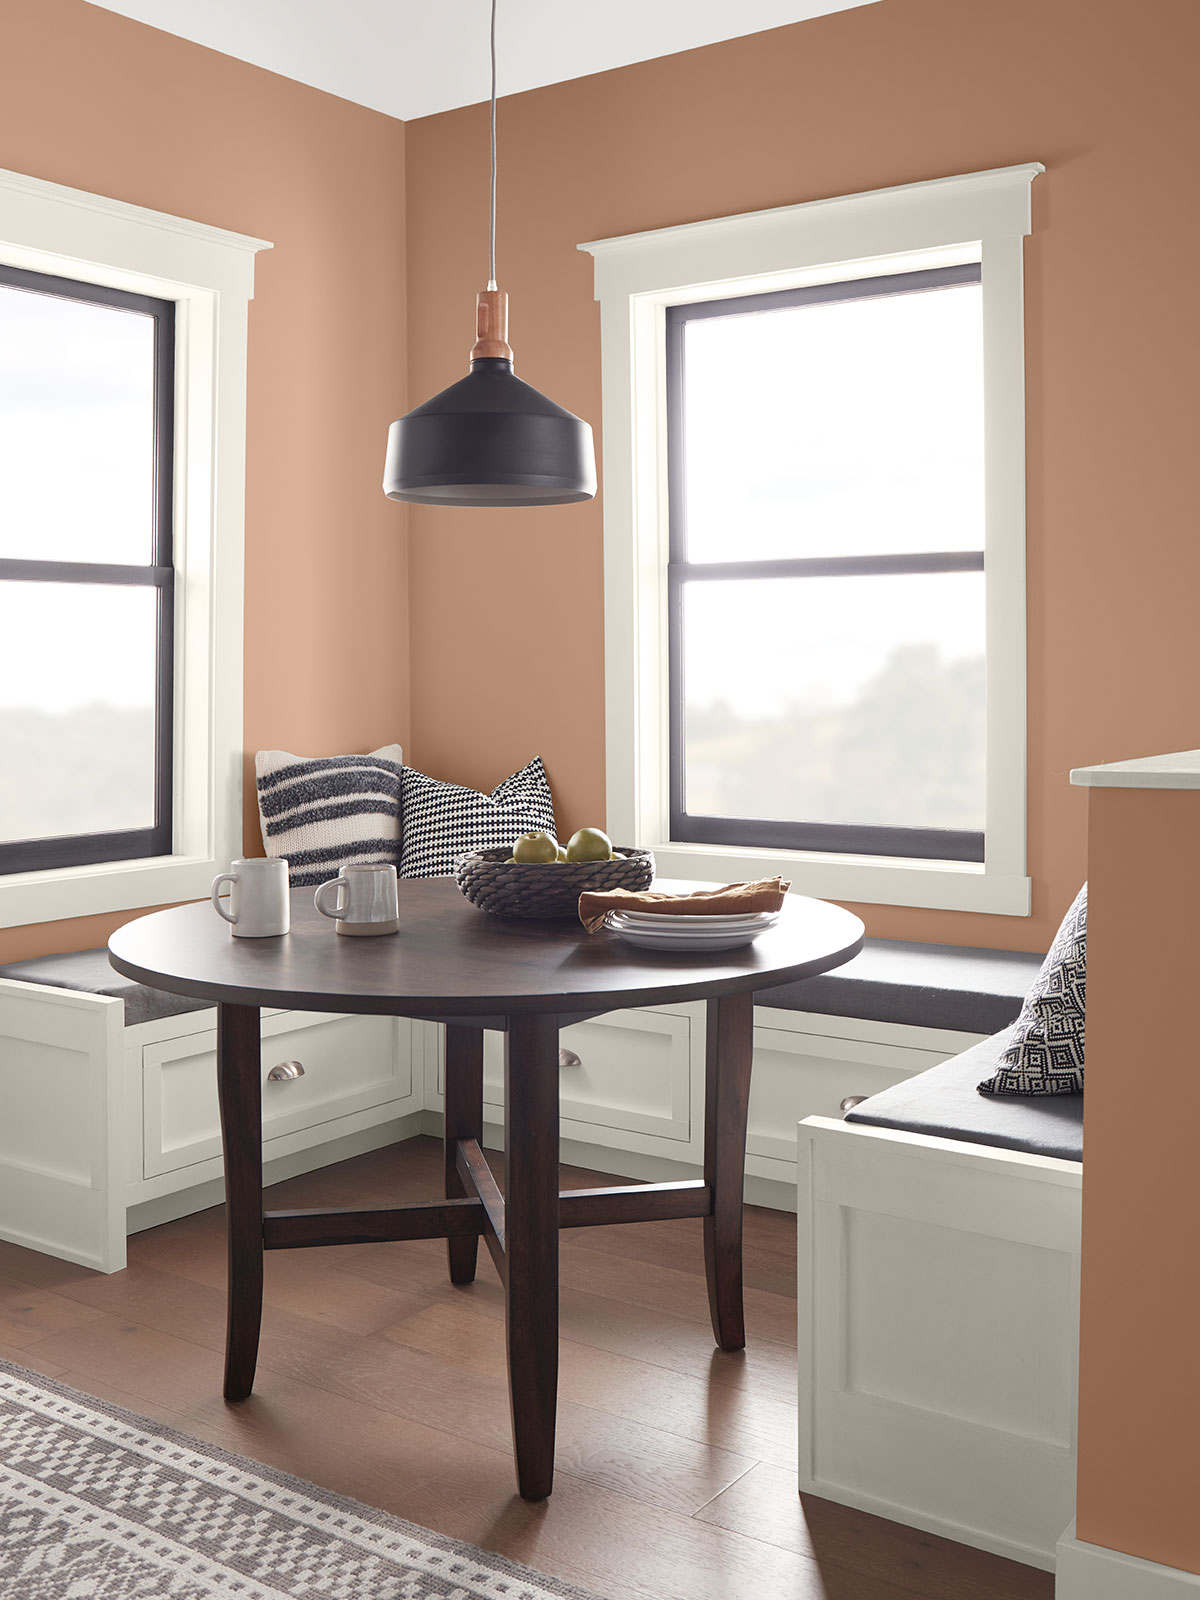 A kitchen nook with white built-in seats sitting below two windows. The table is a dark wood tone. The walls are painted in Canyon Dusk.